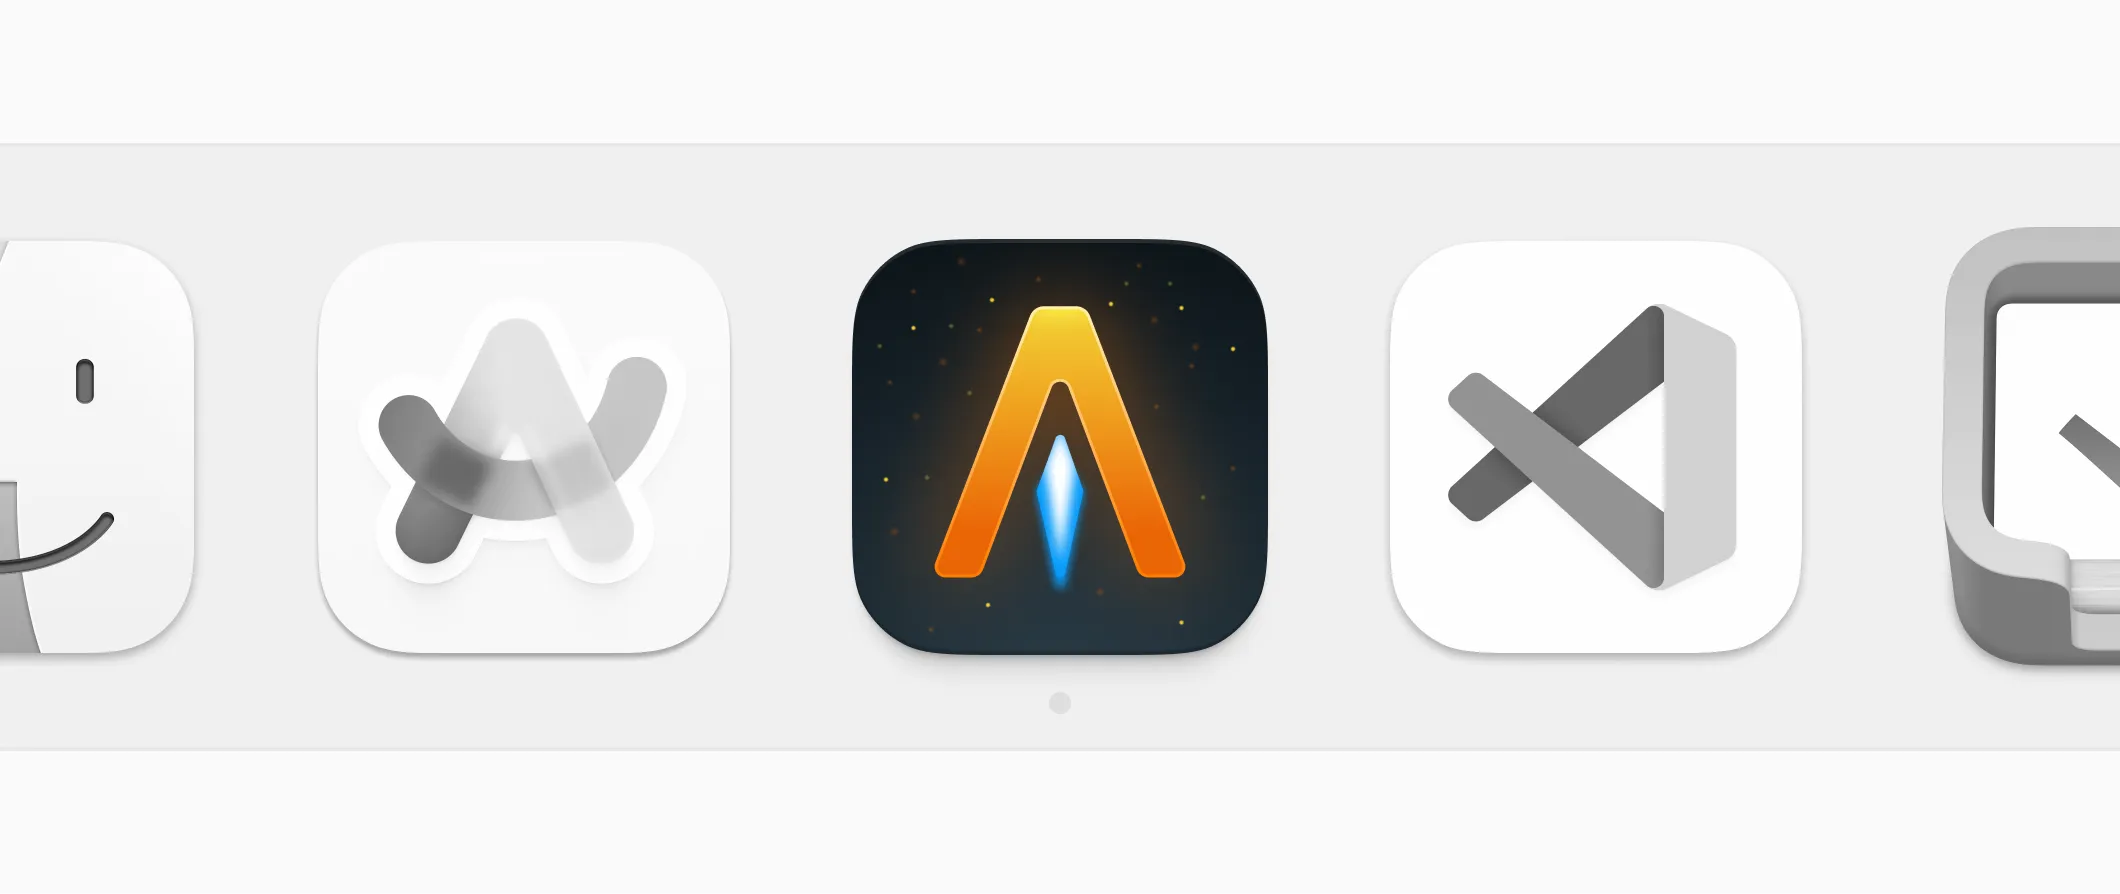 A macOS icon for Alacritty, a terminal emulator. The design is an invertd V with a yellow and orange gradient fill. There is a blue and white diamond shape between the arms of the V, connoting something like a rocket exhaust. There are dots like stars in the background.